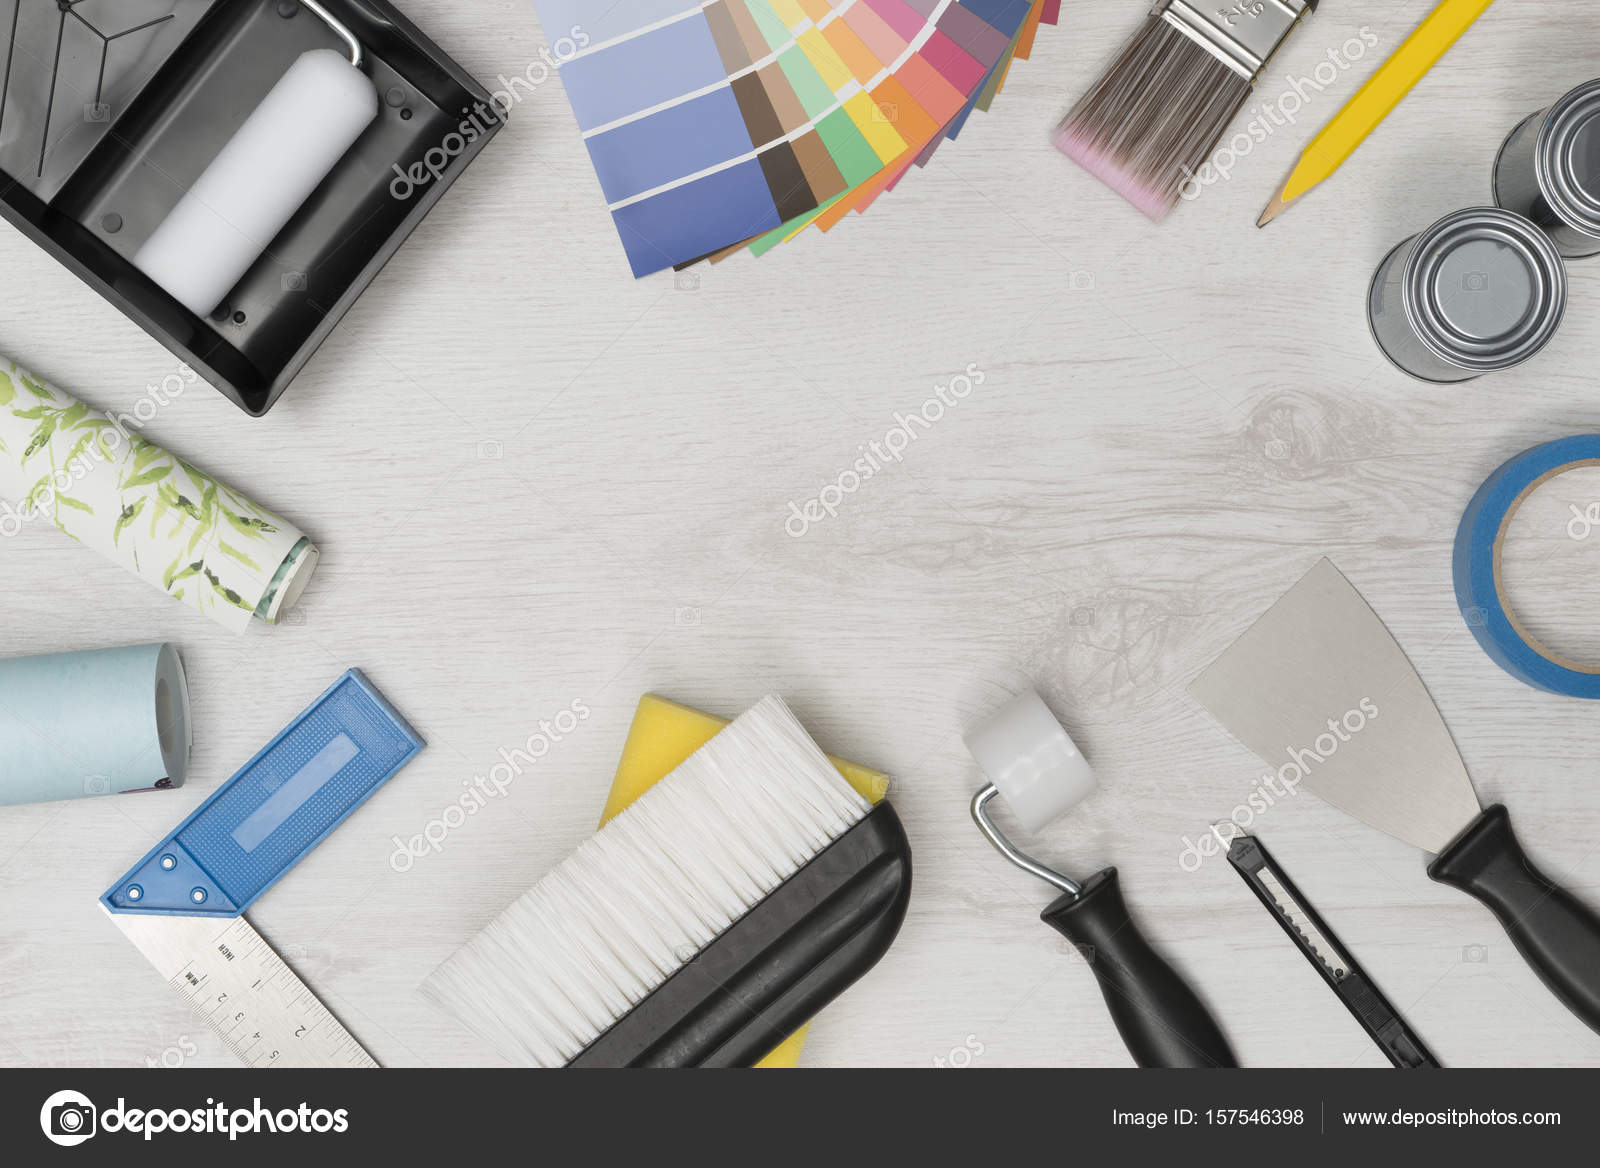 Banner Image of Home Improvement Painting Tools with Copy Space Stock Photo  by ©stock@photographyfirm.co.uk 157546398